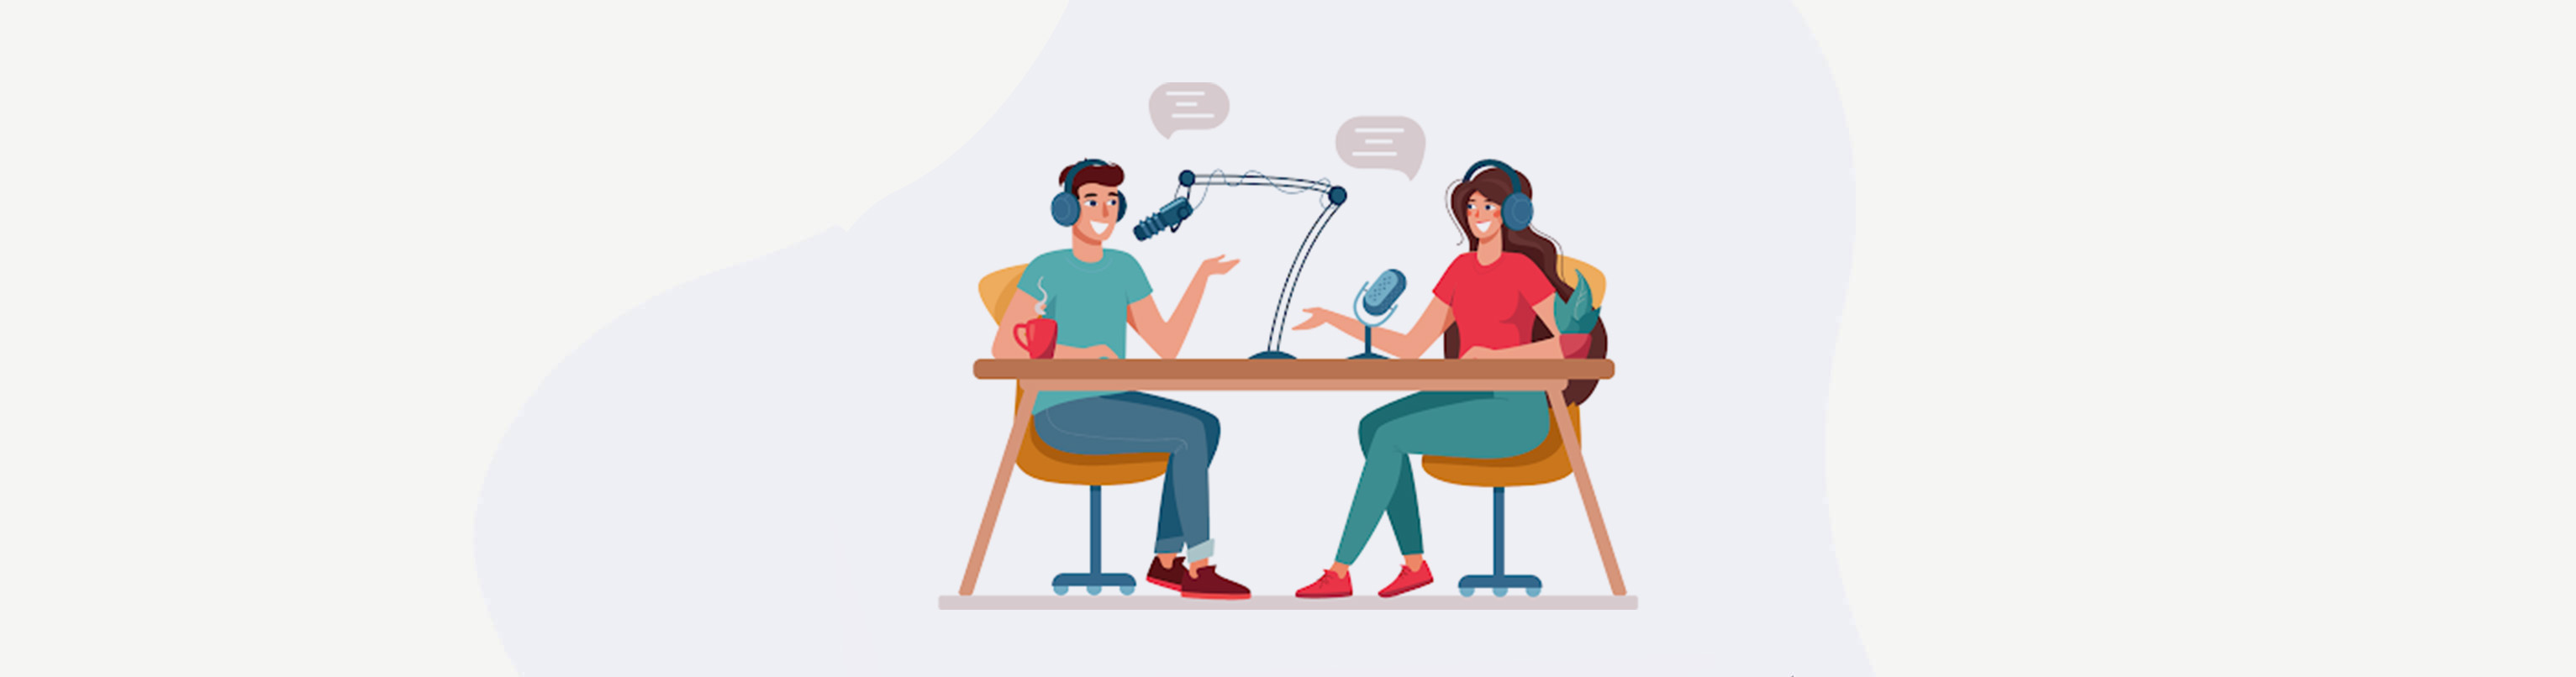 Top seven best eCommerce podcasts to listen to in 2022